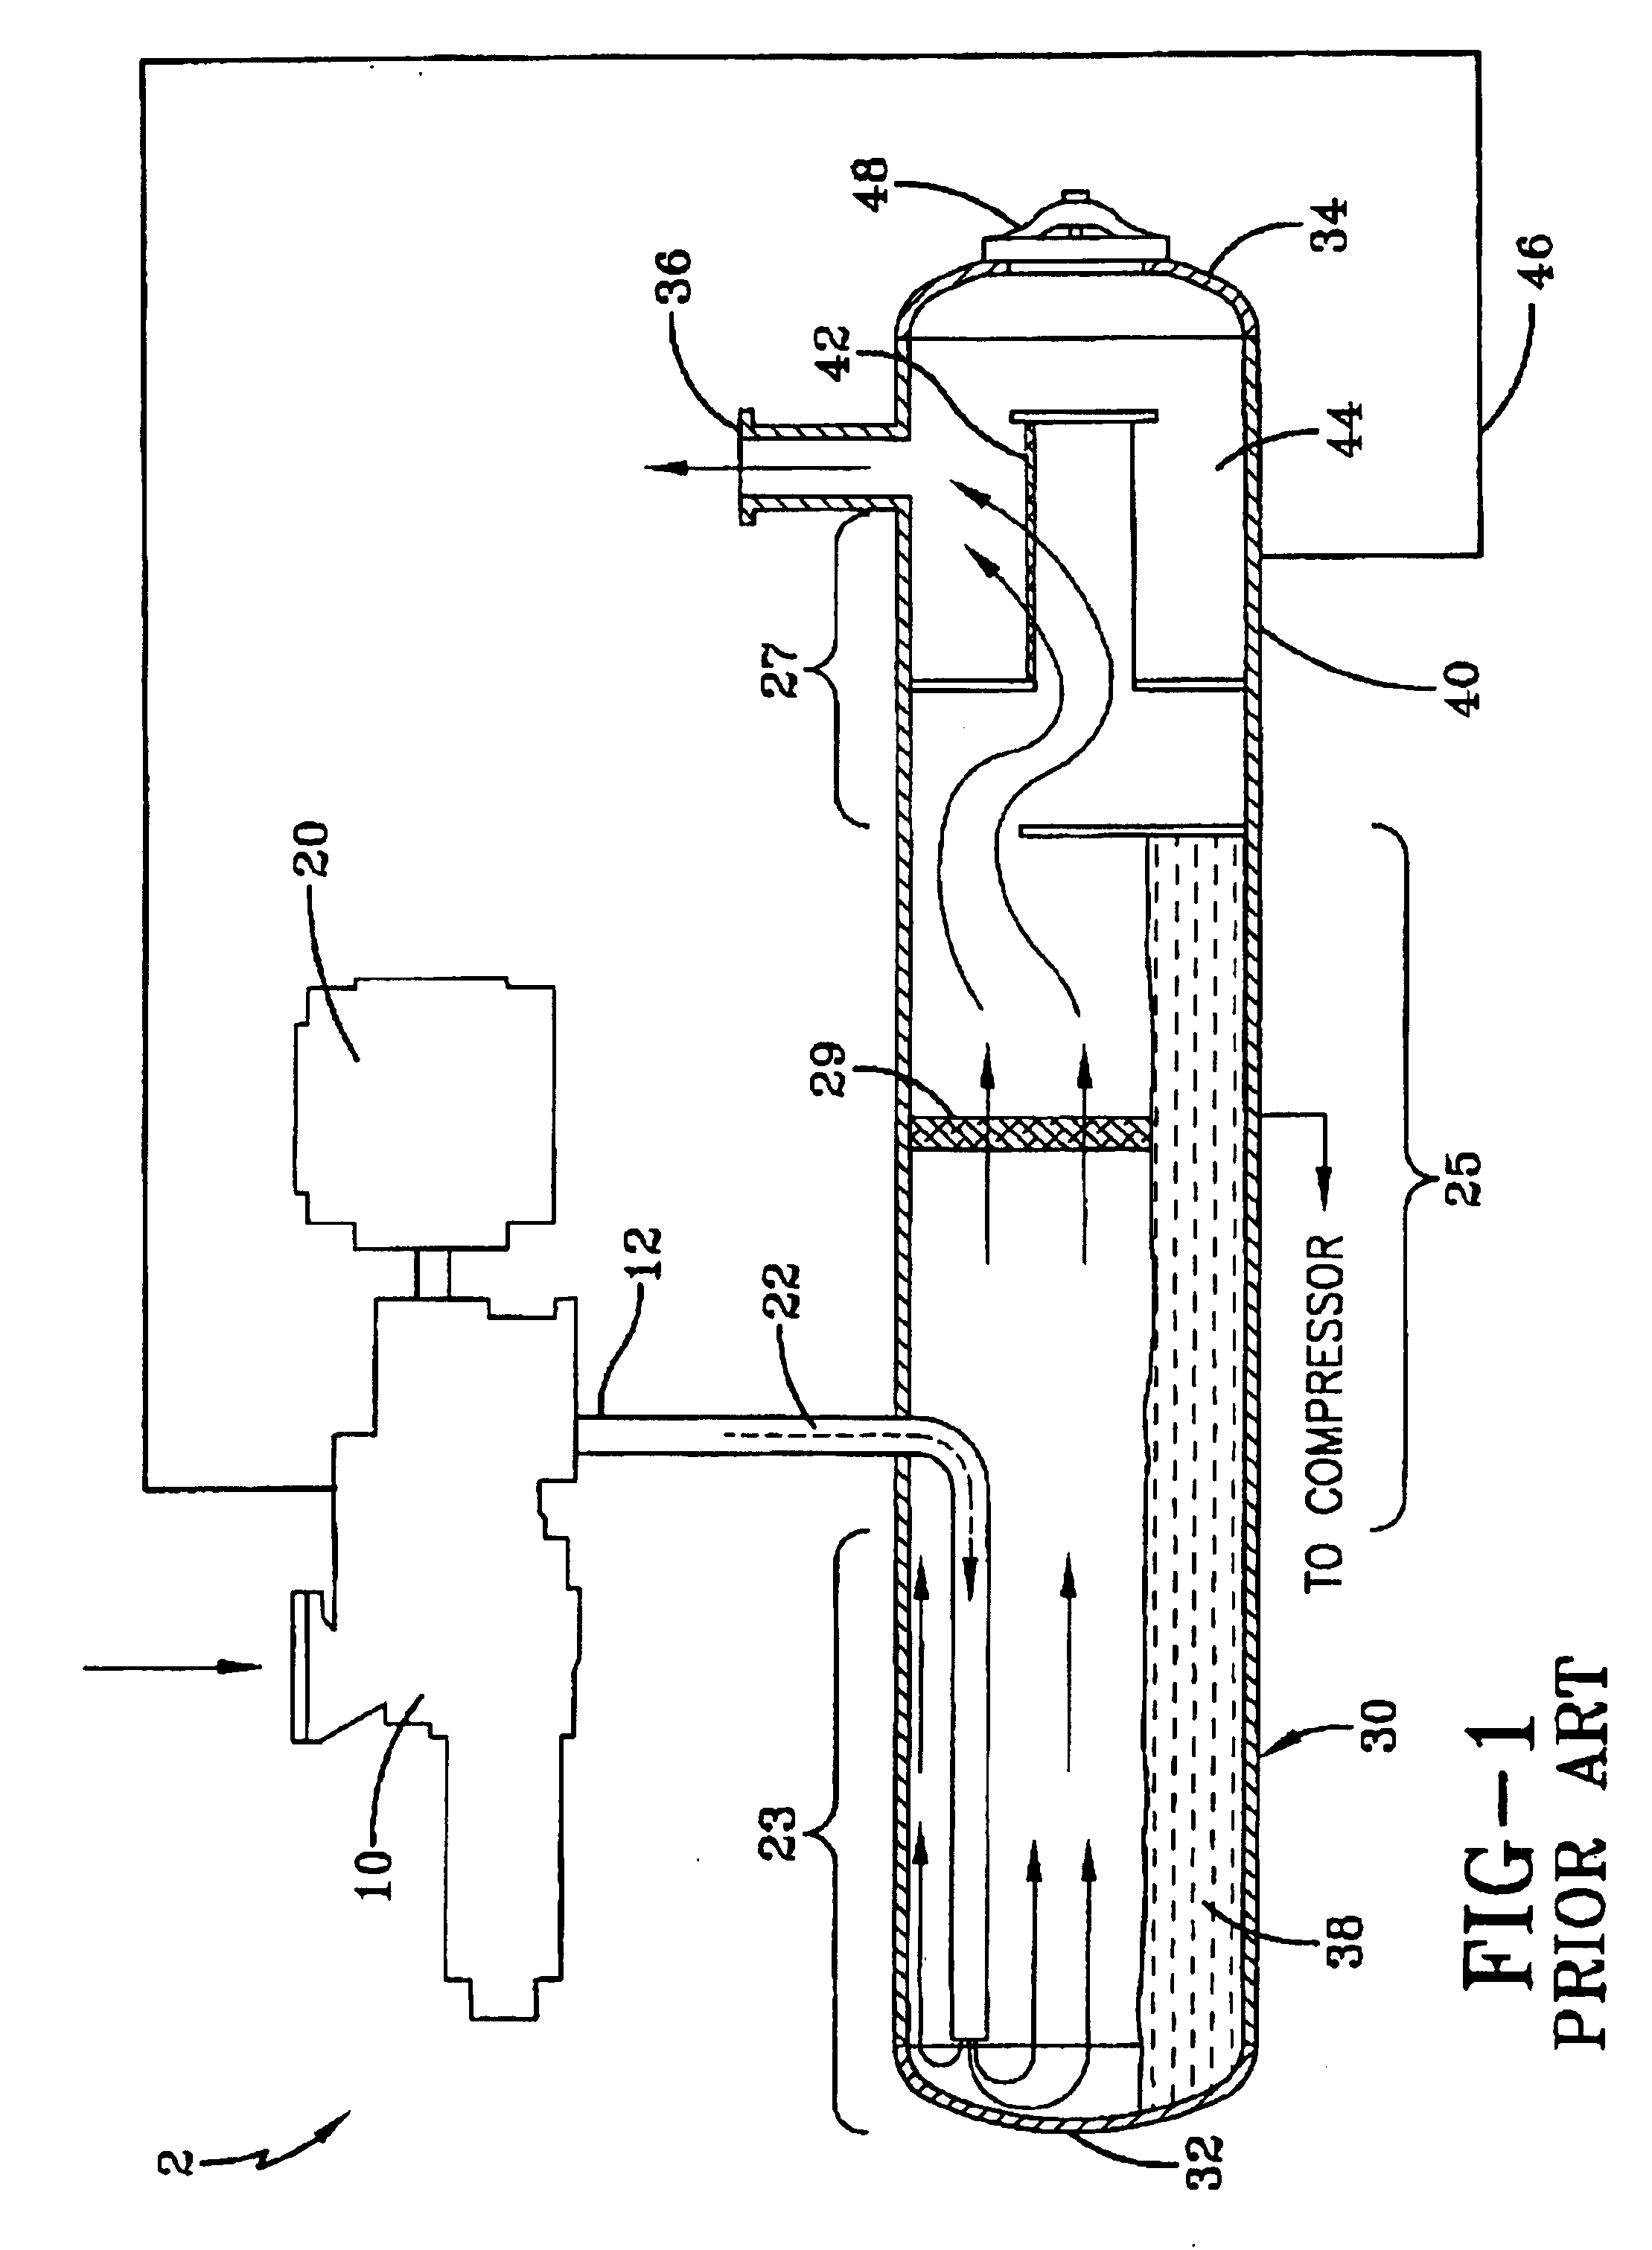 Compressor systems for use with smokeless lubricant